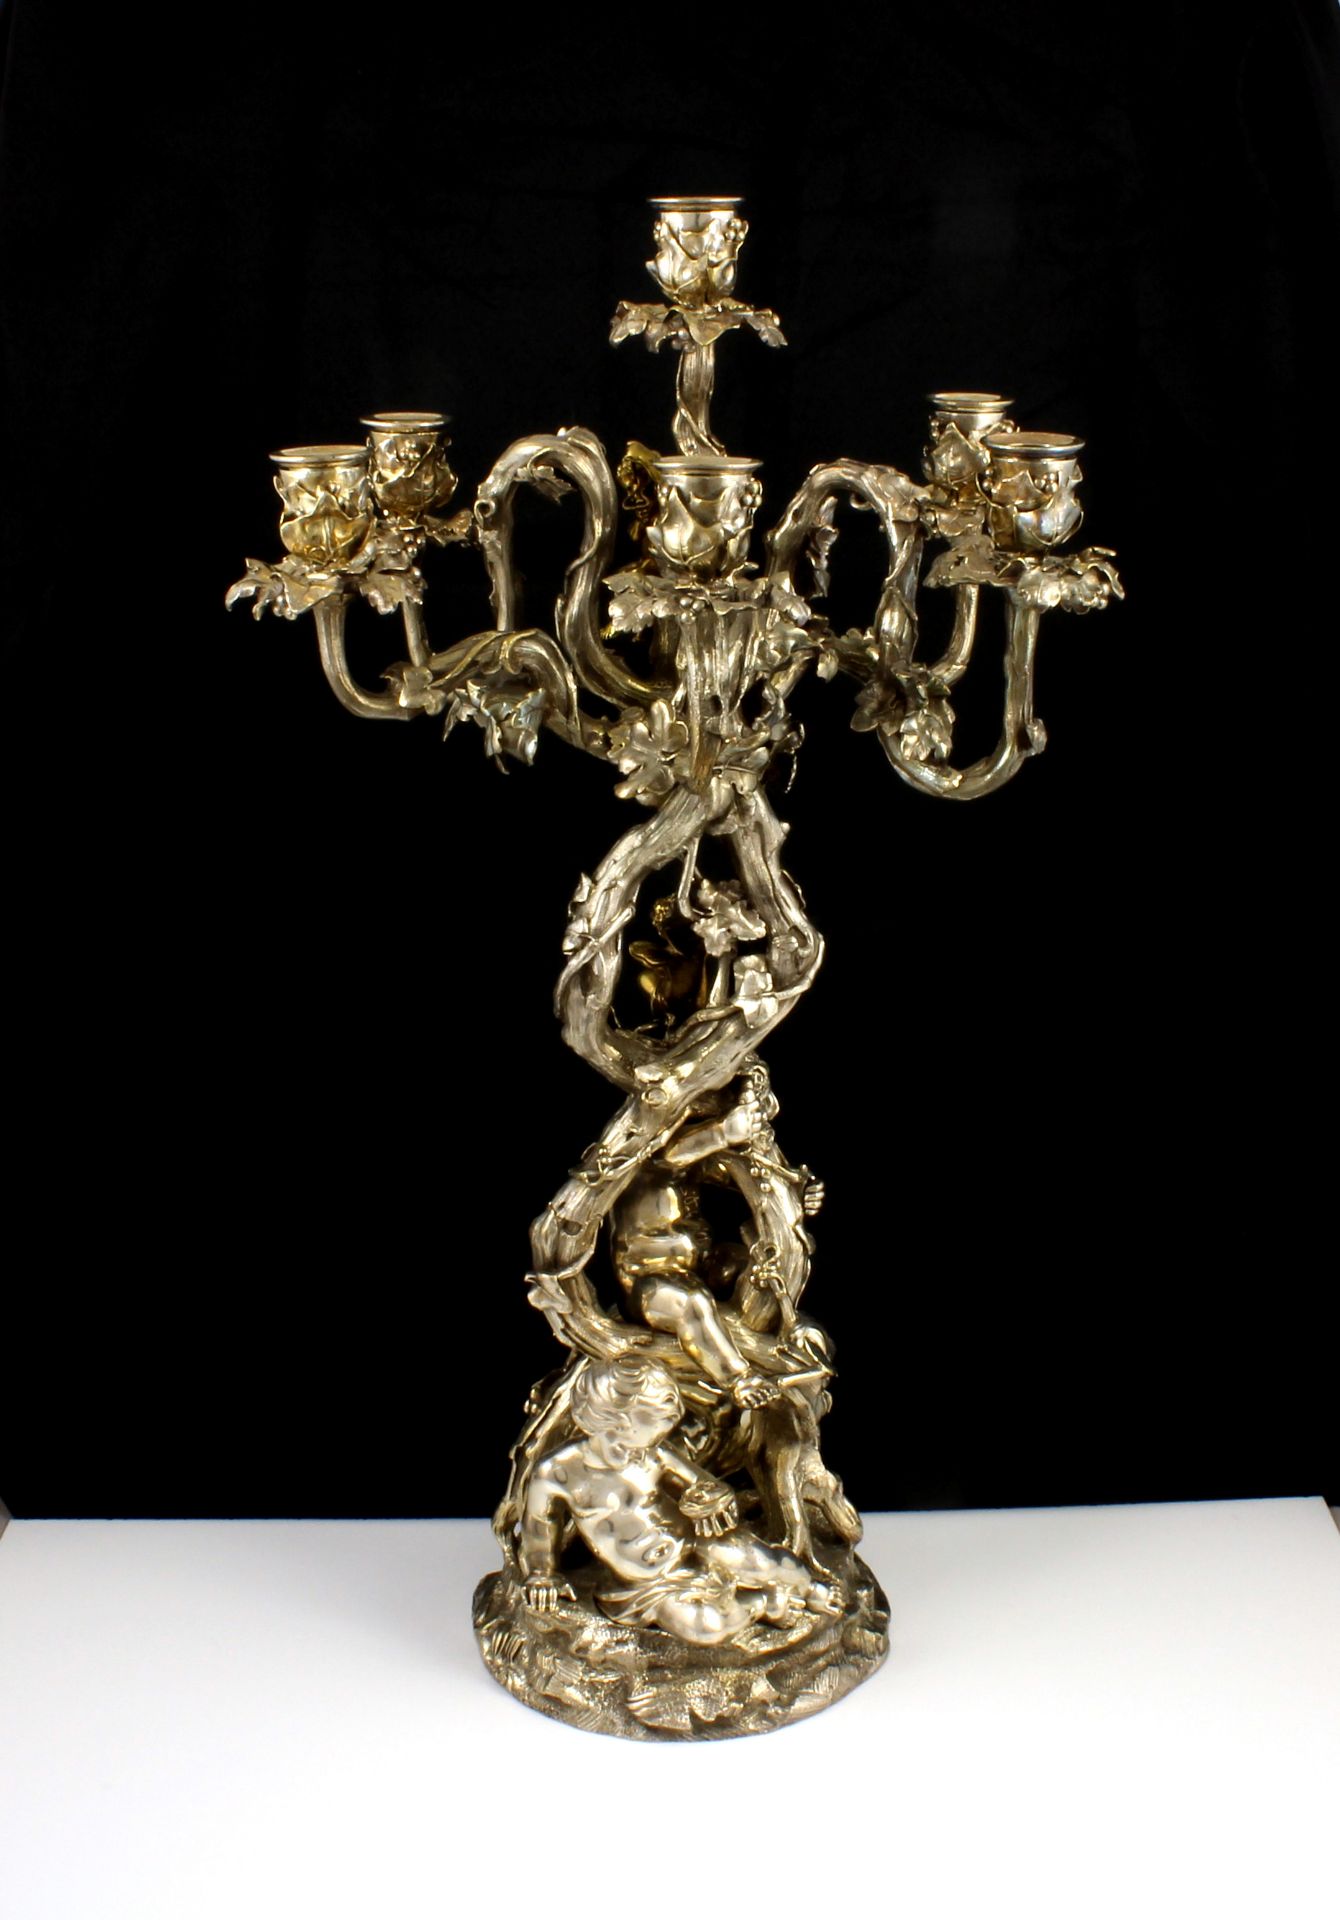 A spectacular antique Silver plated candelabrum attributed to Christofle c1875. Designed to depict a